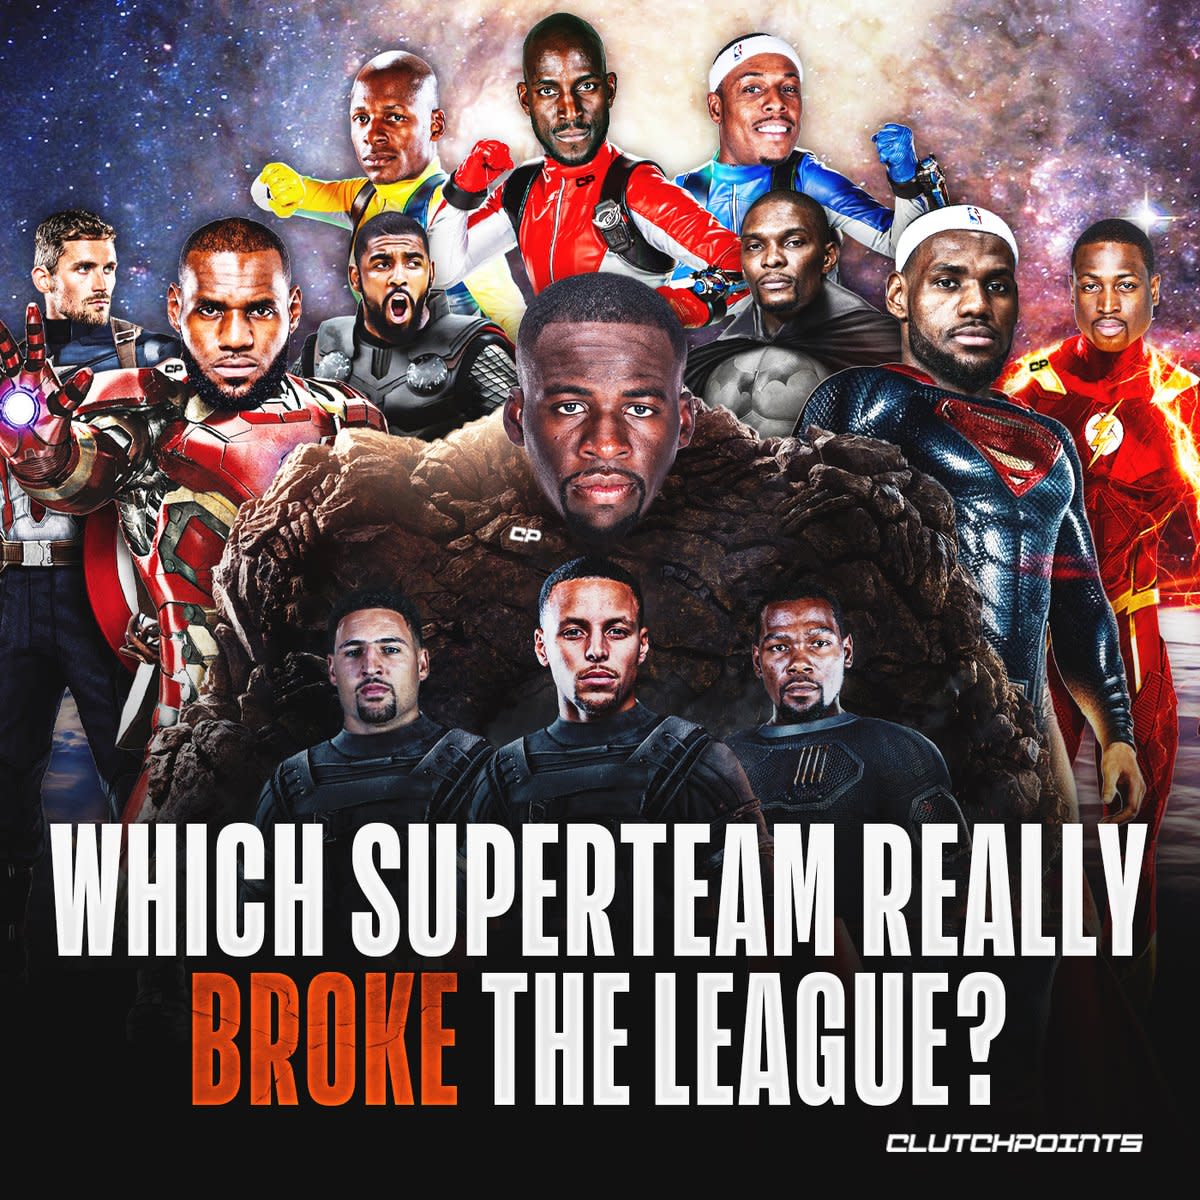 NBA Fans Debate About Which Superteam Broke The League: “The Heat. That Was The Only Real Super Team.”